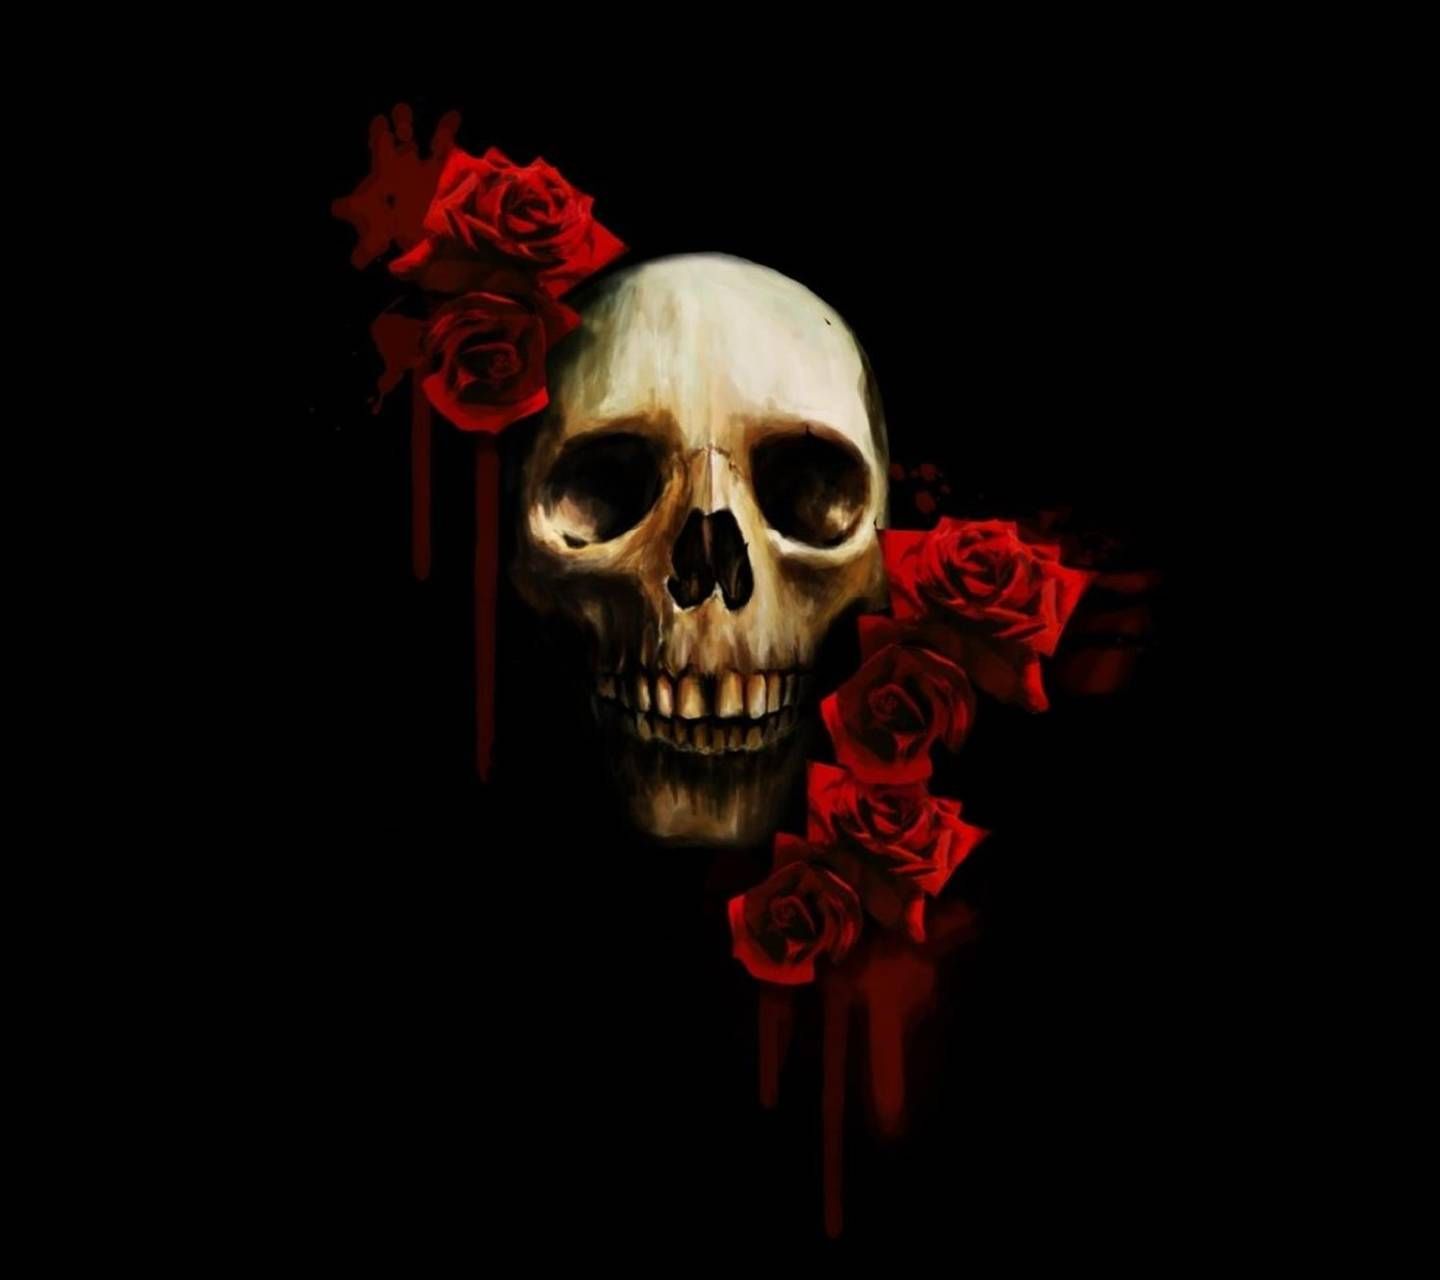 Roses and Skulls Wallpaper Free Roses and Skulls Background